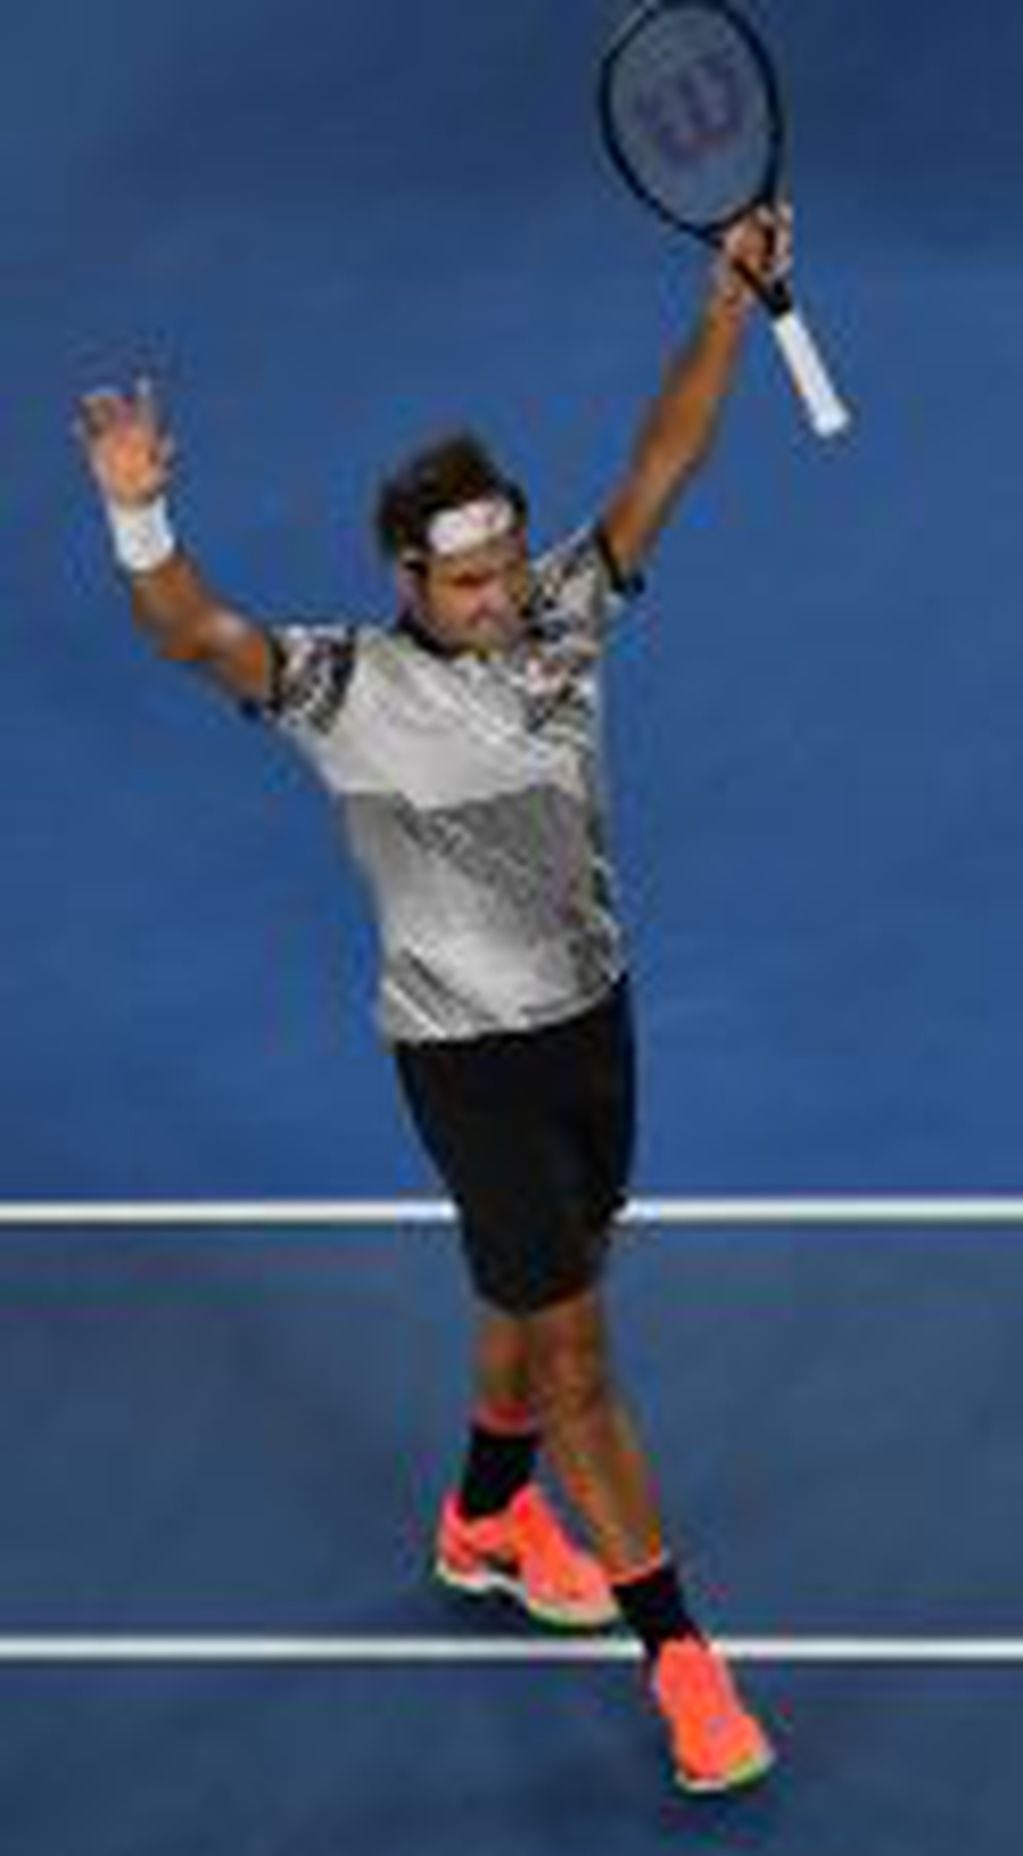 Switzerland's Roger Federer celebrates his win against Switzerland's Stanislas Wawrinka during their men's singles semi-final match on day 11 of the Australian Open tennis tournament in Melbourne on January 26, 2017. / AFP PHOTO / GREG WOOD / IMAGE RESTRI